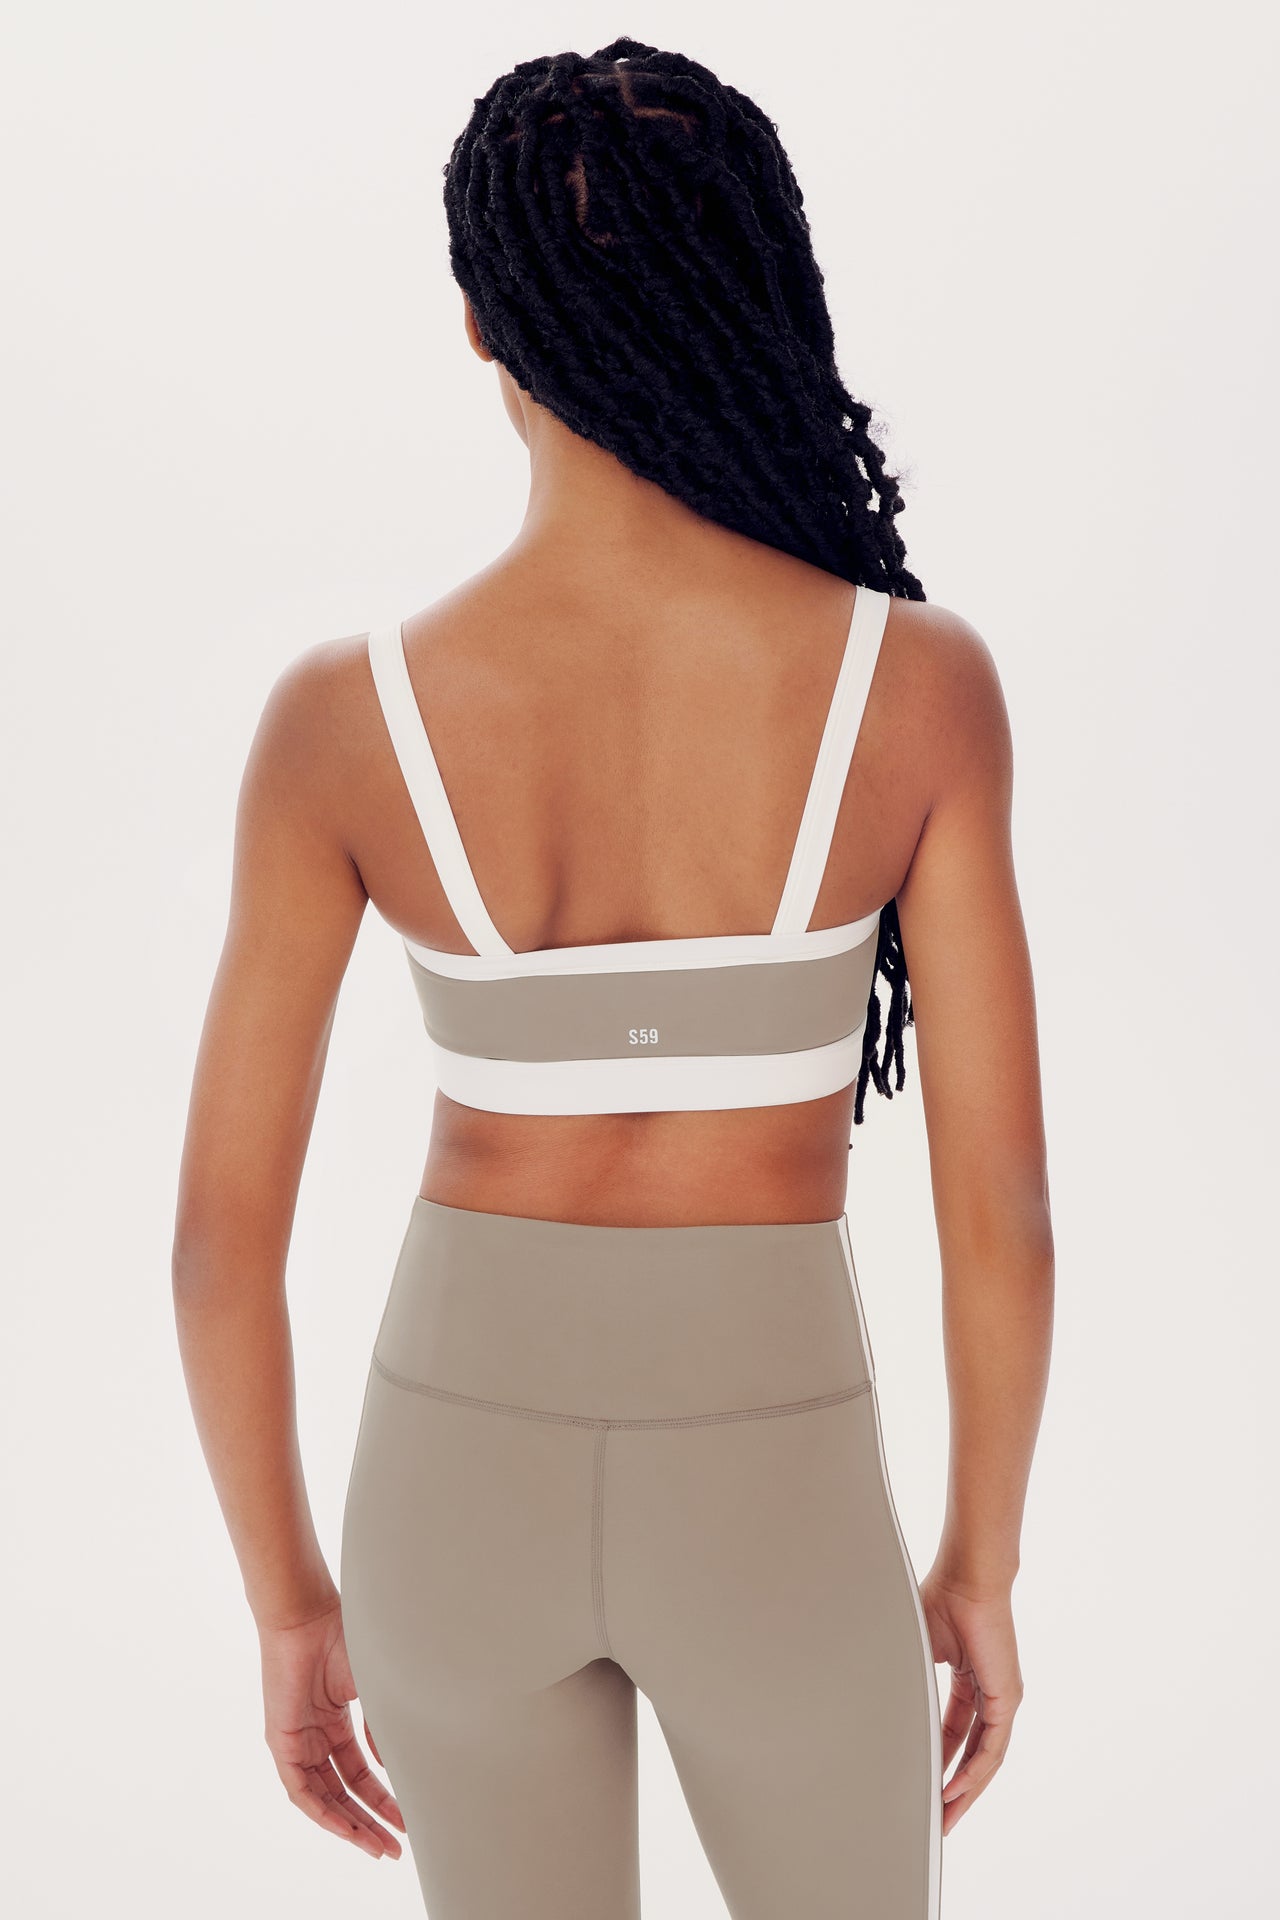 A woman from behind wearing a white SPLITS59 Monah Rigor Bra and beige leggings, highlighting athletic wear design.